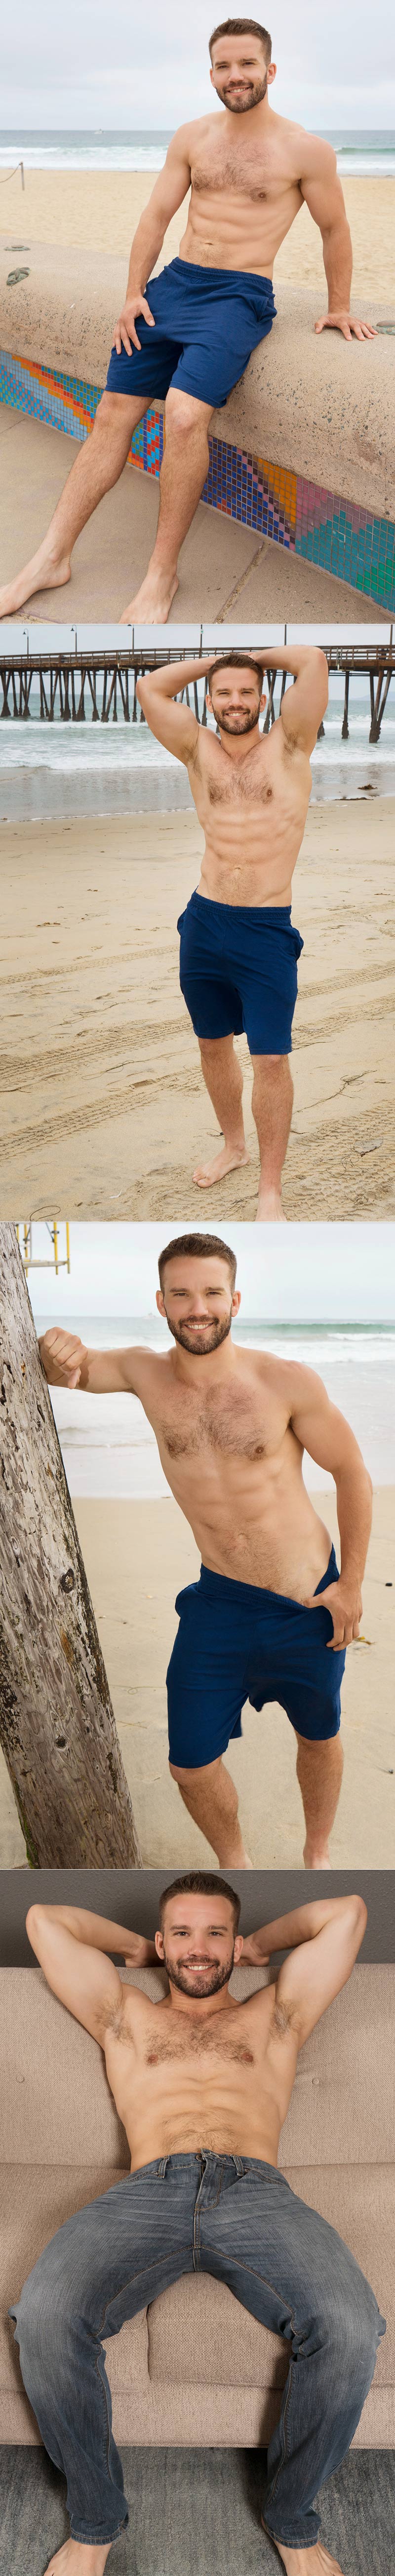 Jackson (Introductory Solo) at SeanCody